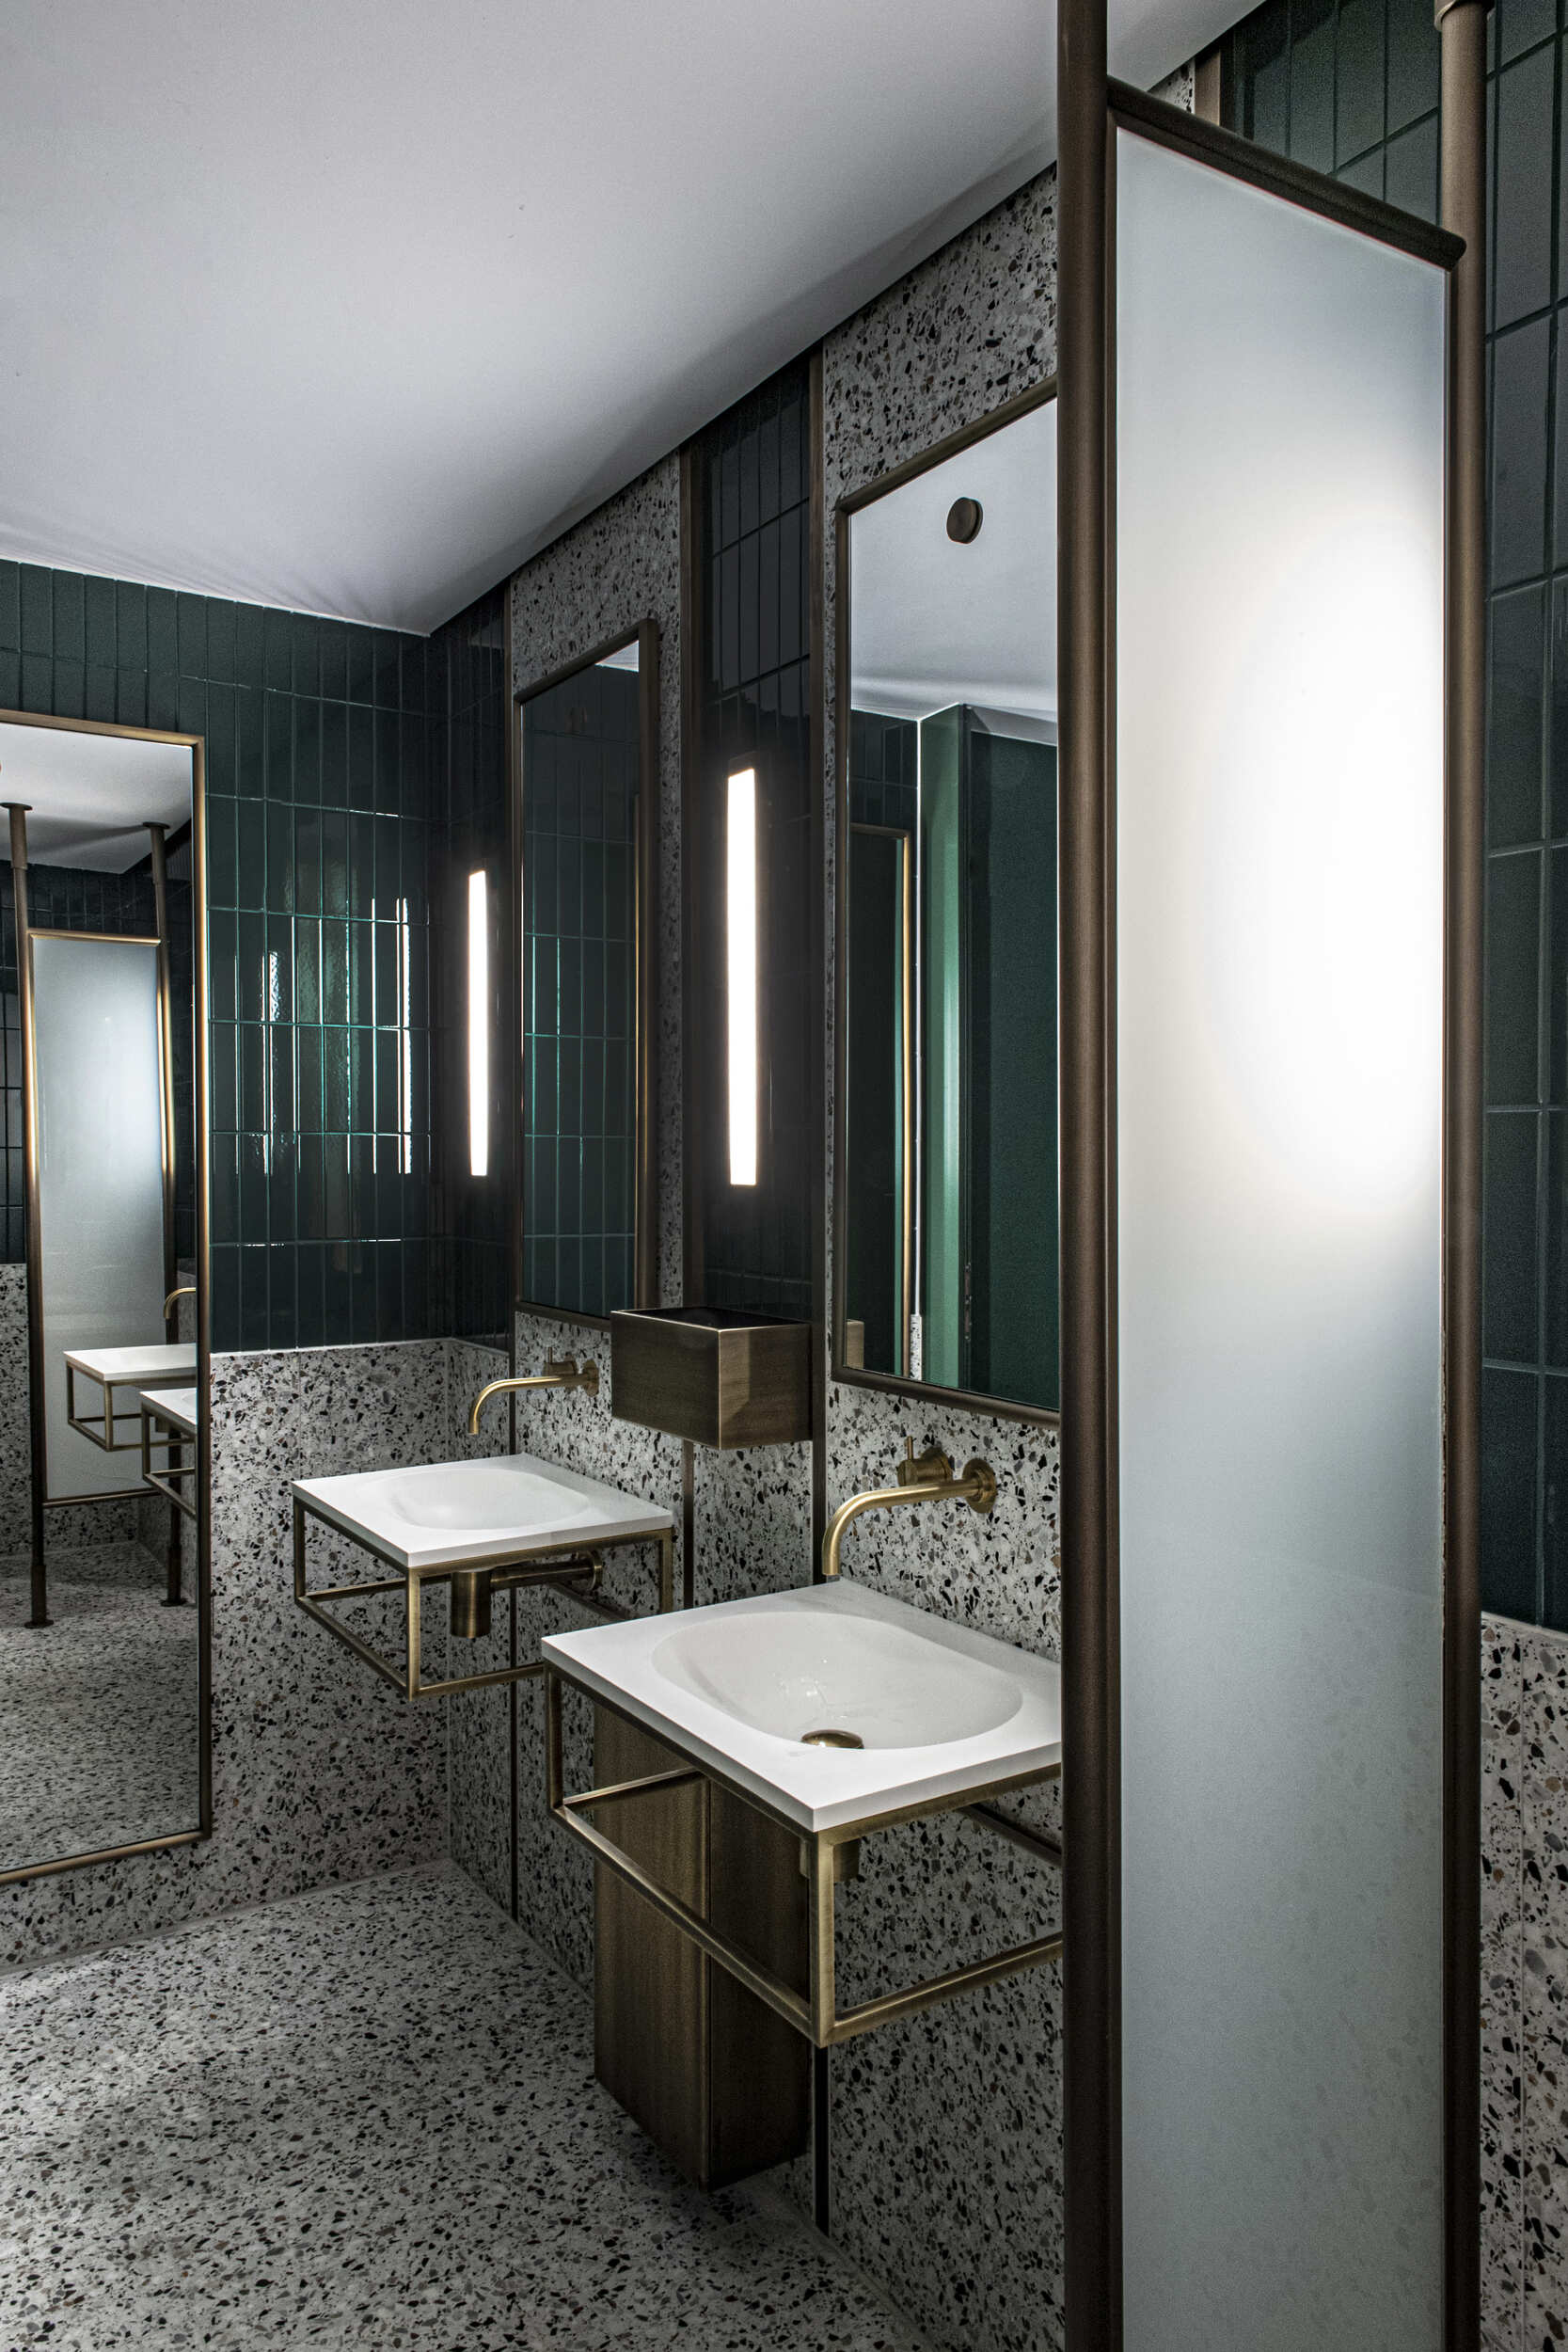 Toilet basins with brass finish and modern wall mounted mirrors